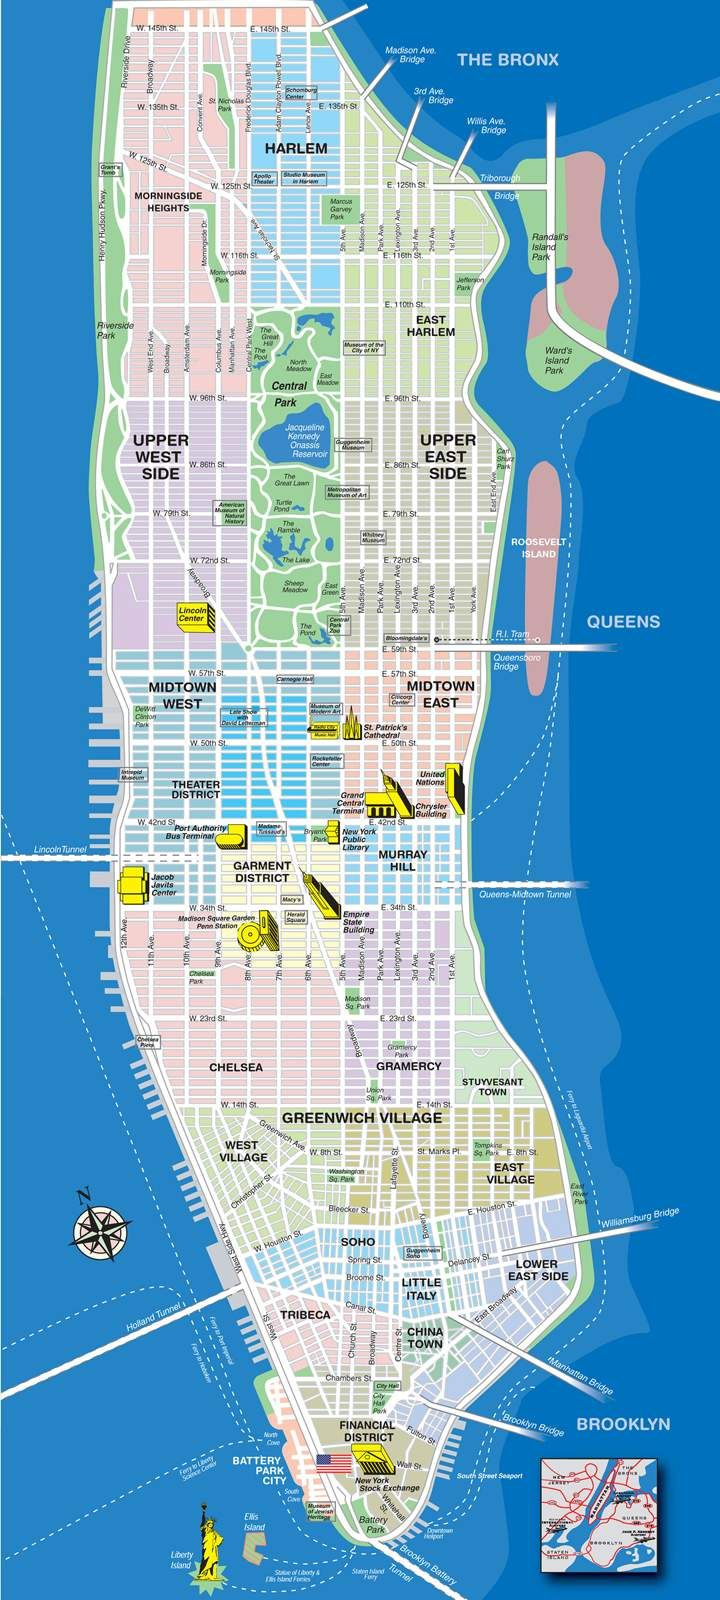 High-Resolution Map Of Manhattan For Print Or Download | Usa Travel - Free Printable Map Of Manhattan